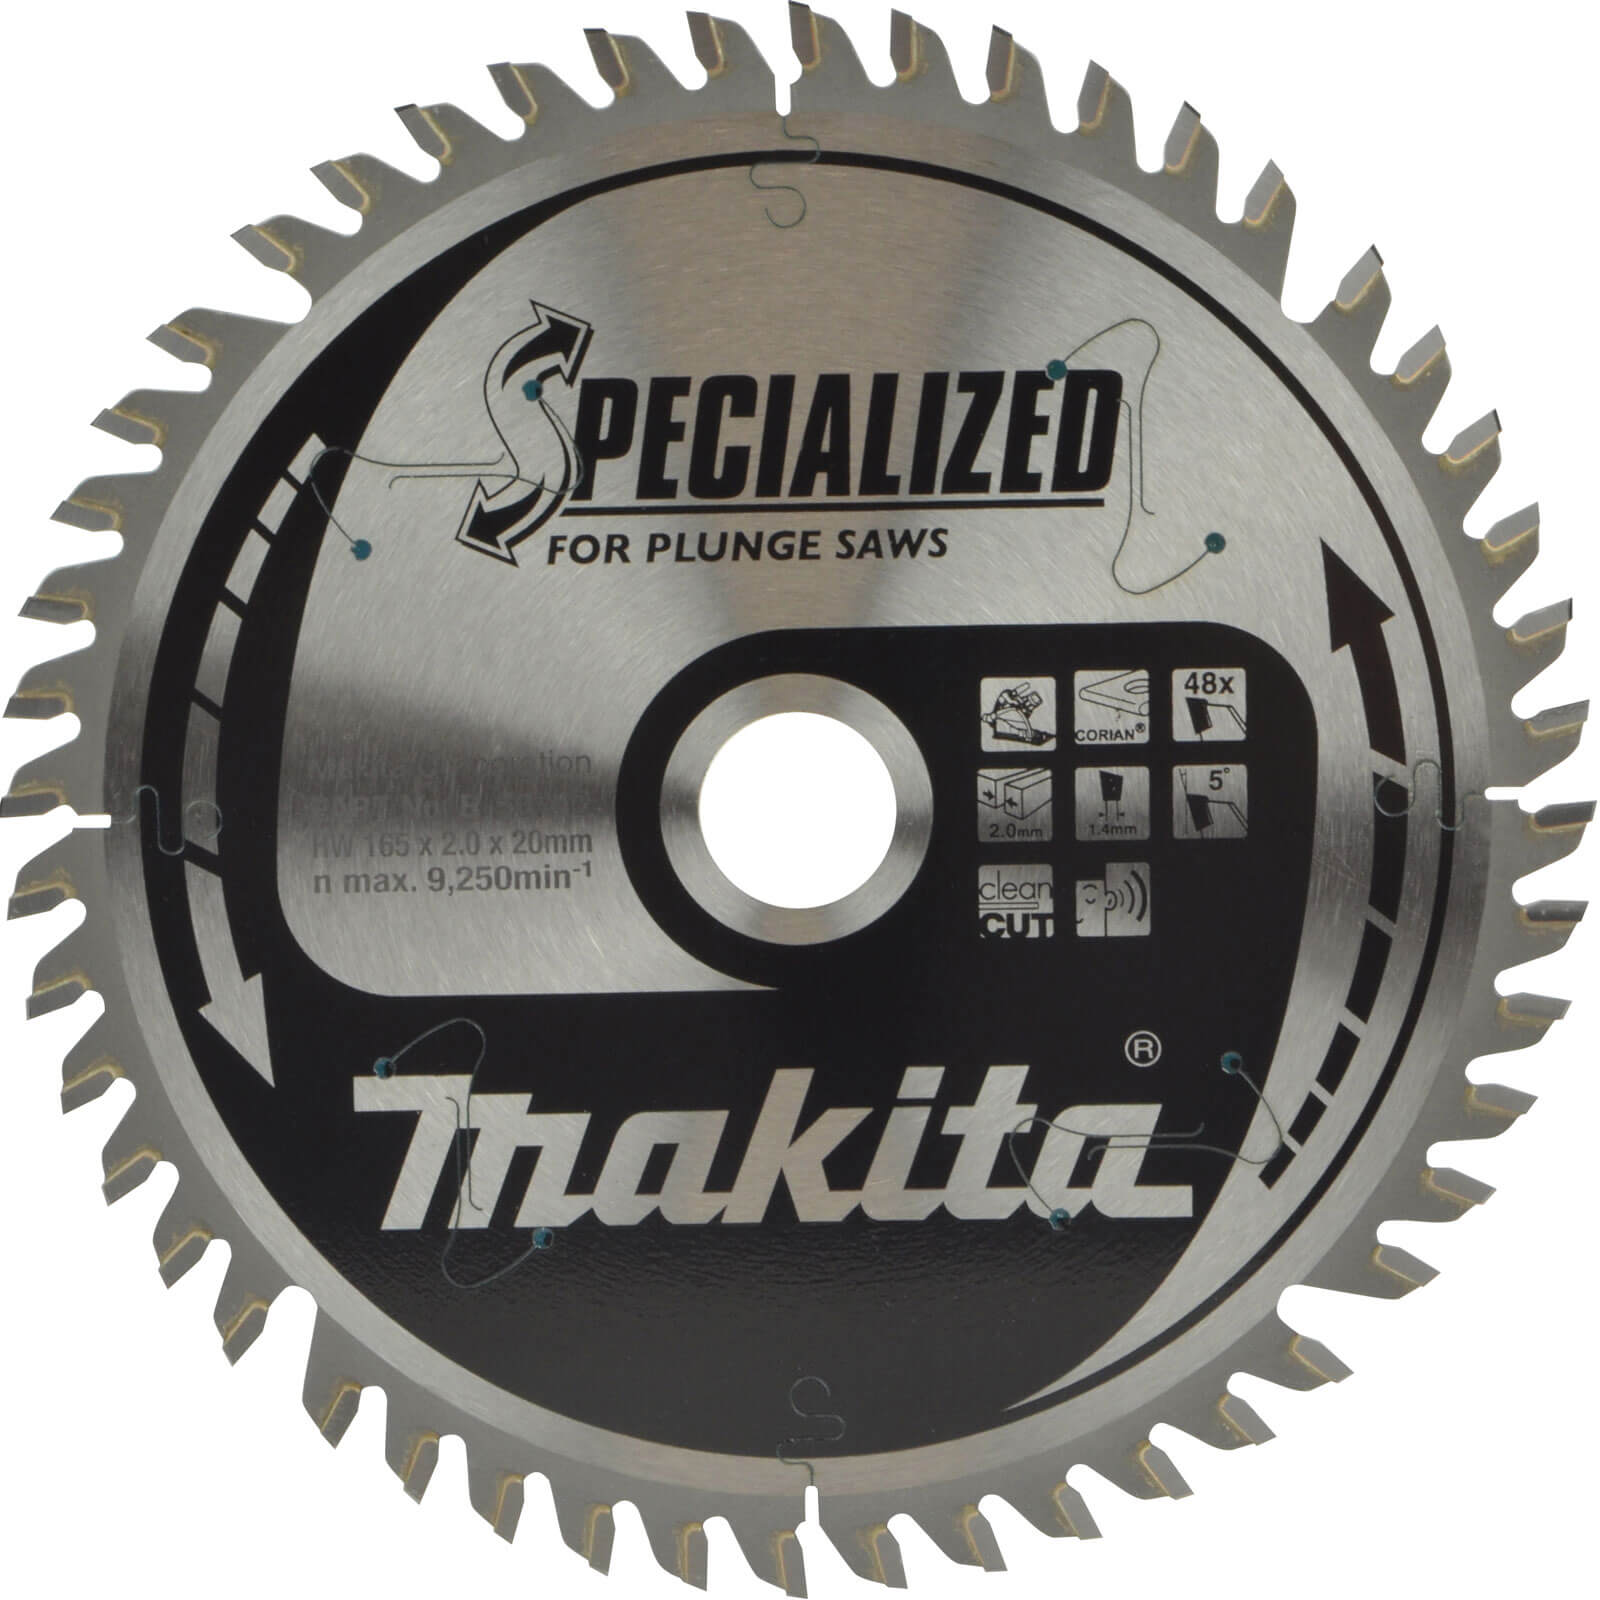 Makita SPECIALIZED Plunge Saw Corian Cutting Saw Blade 165mm 48T 20mm